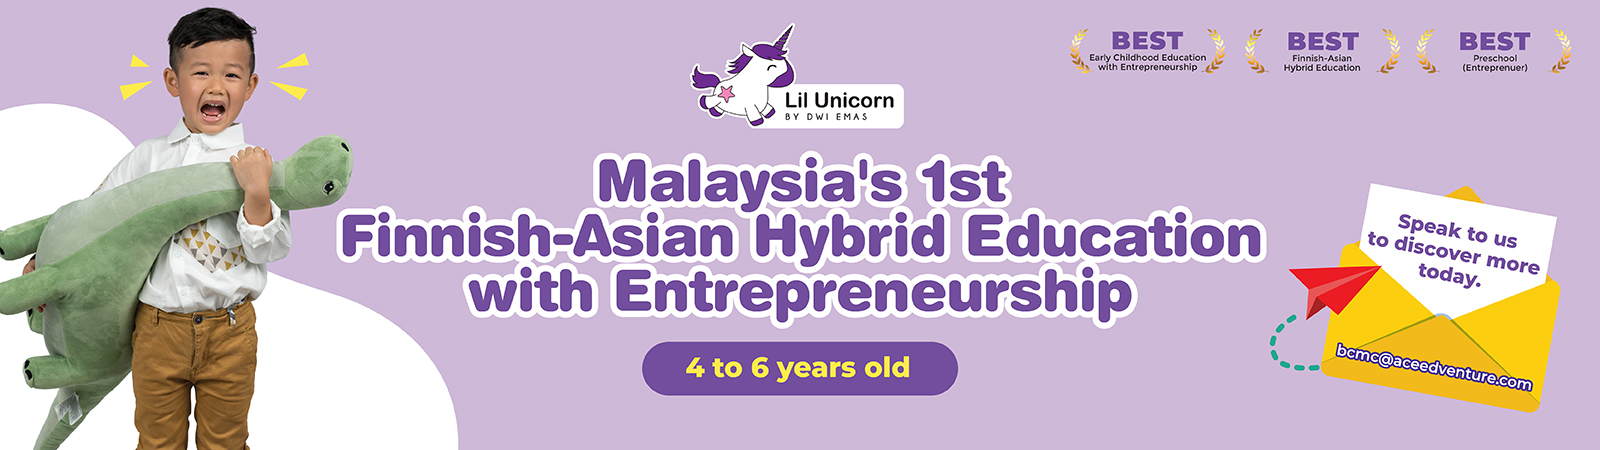 (Brand Story) Lil Unicorn: The Quality Education Your Child Deserves